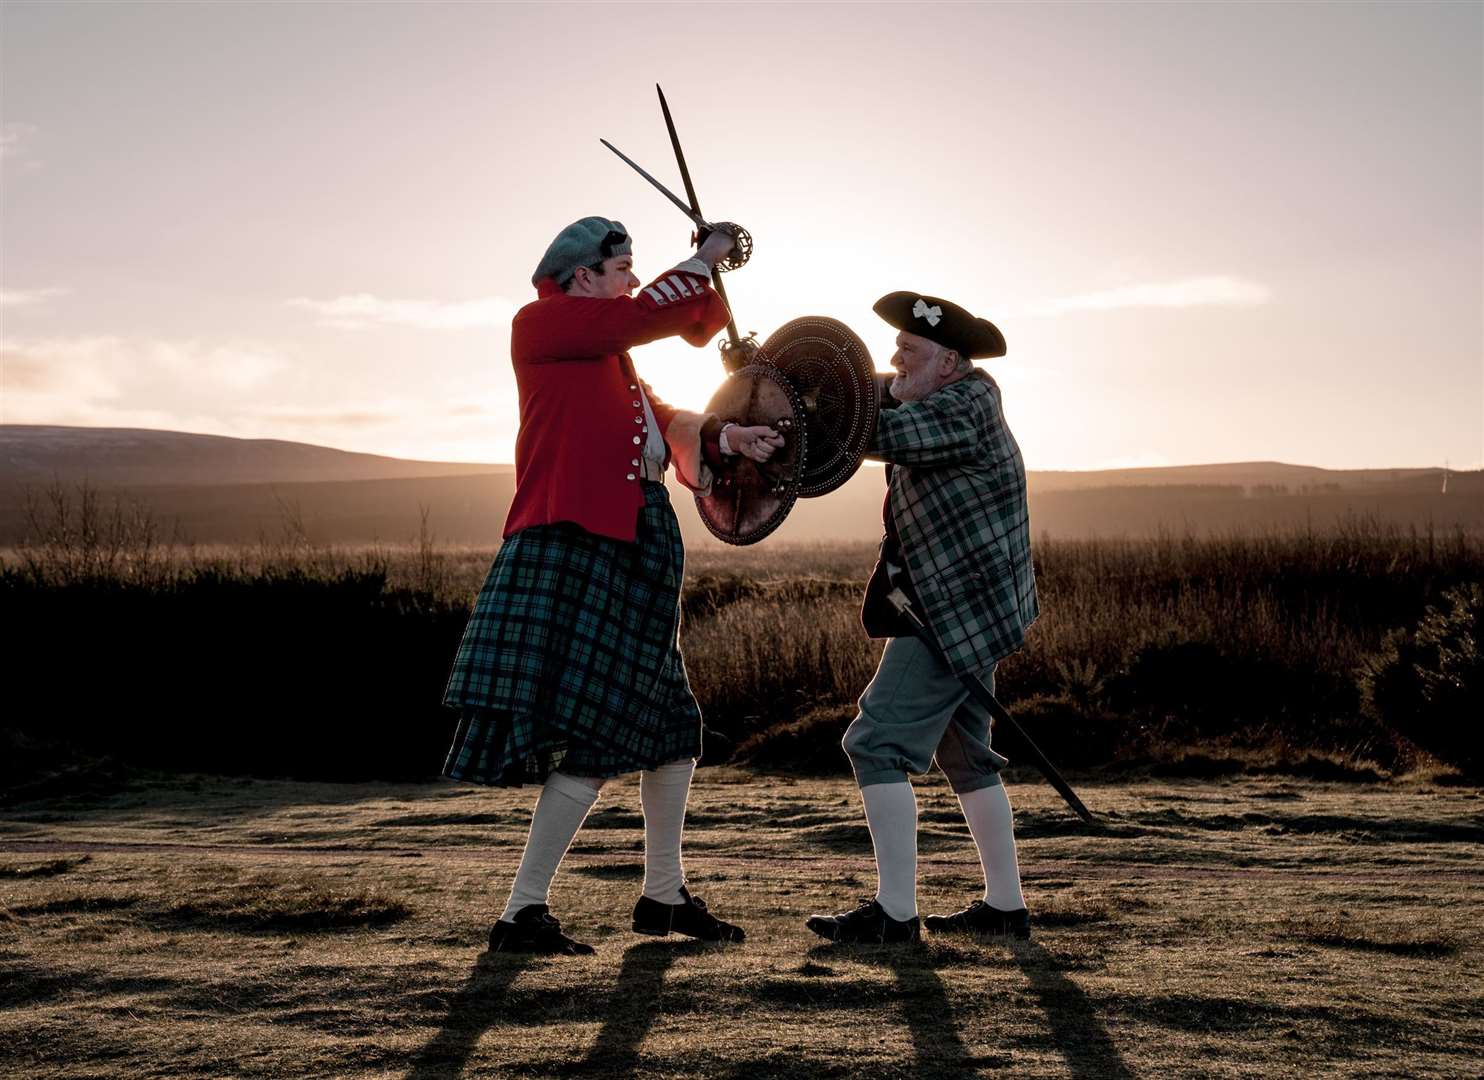 The Battle of Culloden gets a mention in the new video from Visit Inverness Loch Ness.